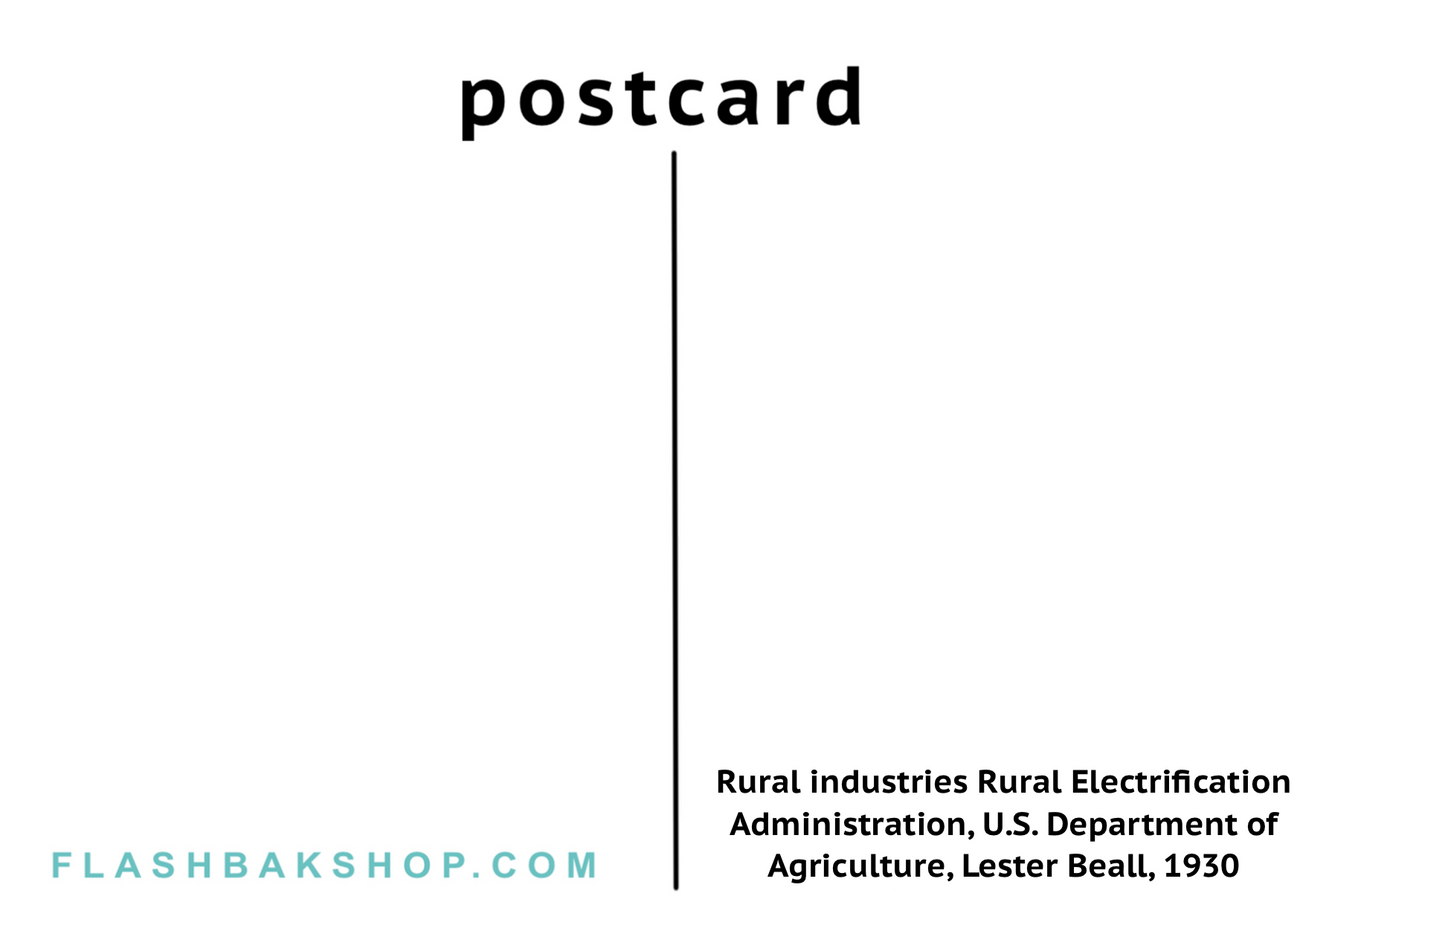 Rural Industries, Rural Electrification Administration, U.S. Department of Agriculture by Lester Beall, 1930 - Postcard